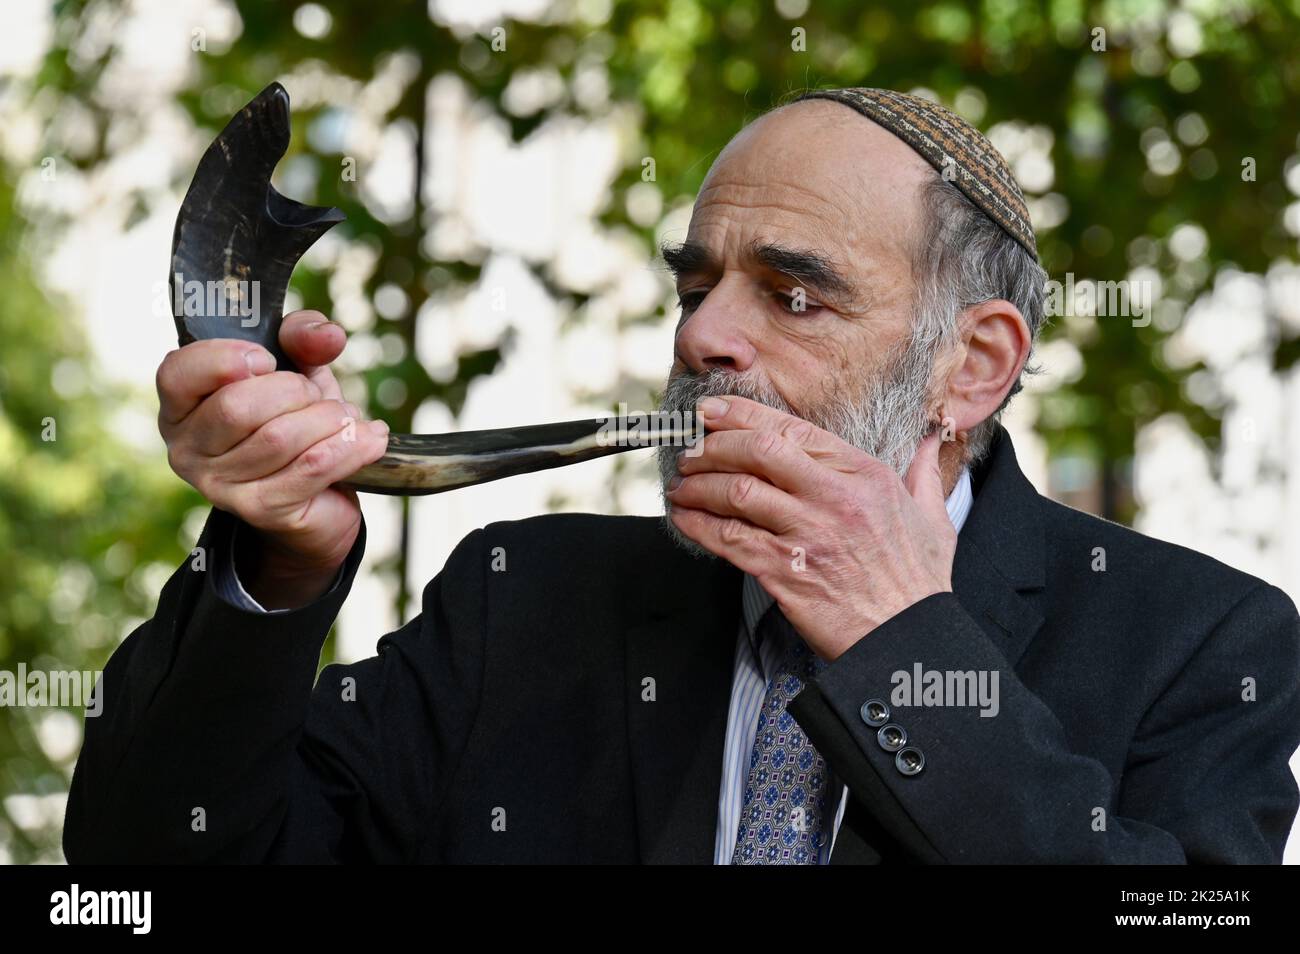 London, UK. Rabbi Jonathan Wittenberg. Rabbi blowing Shofar. Rally in Parliament Square to highlight the severe impacts of climate change already affecting communities around the world. Stock Photo